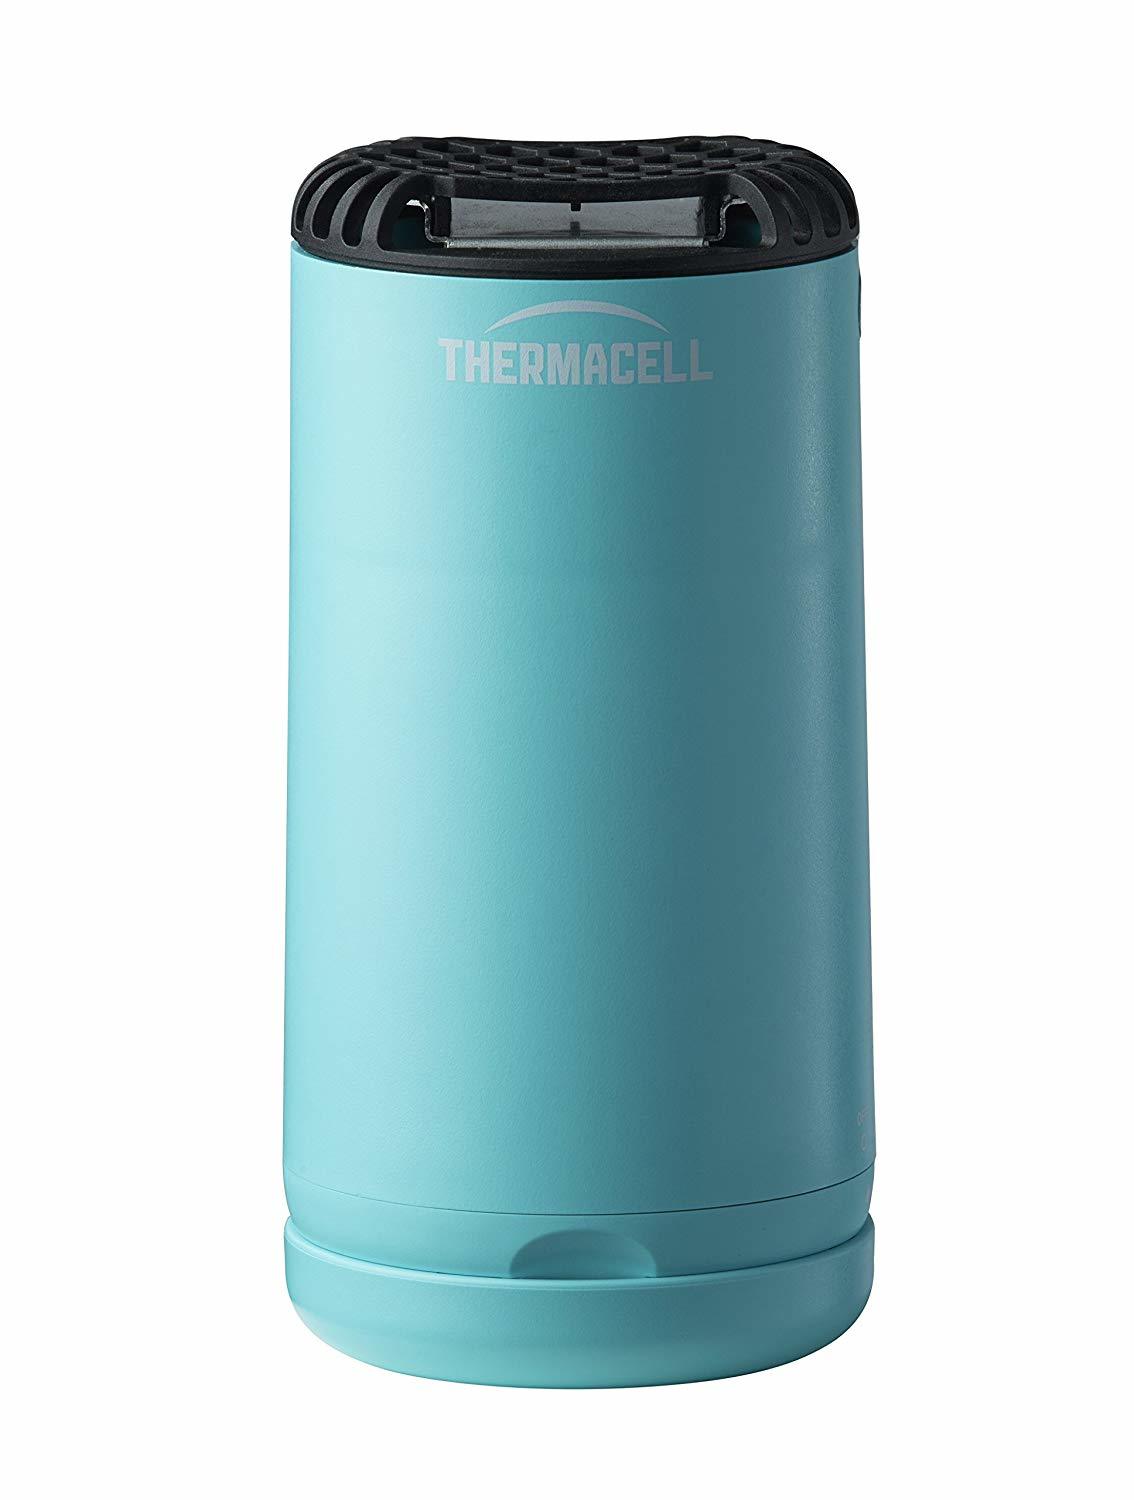 Thermacell Mosquito Patio Shield